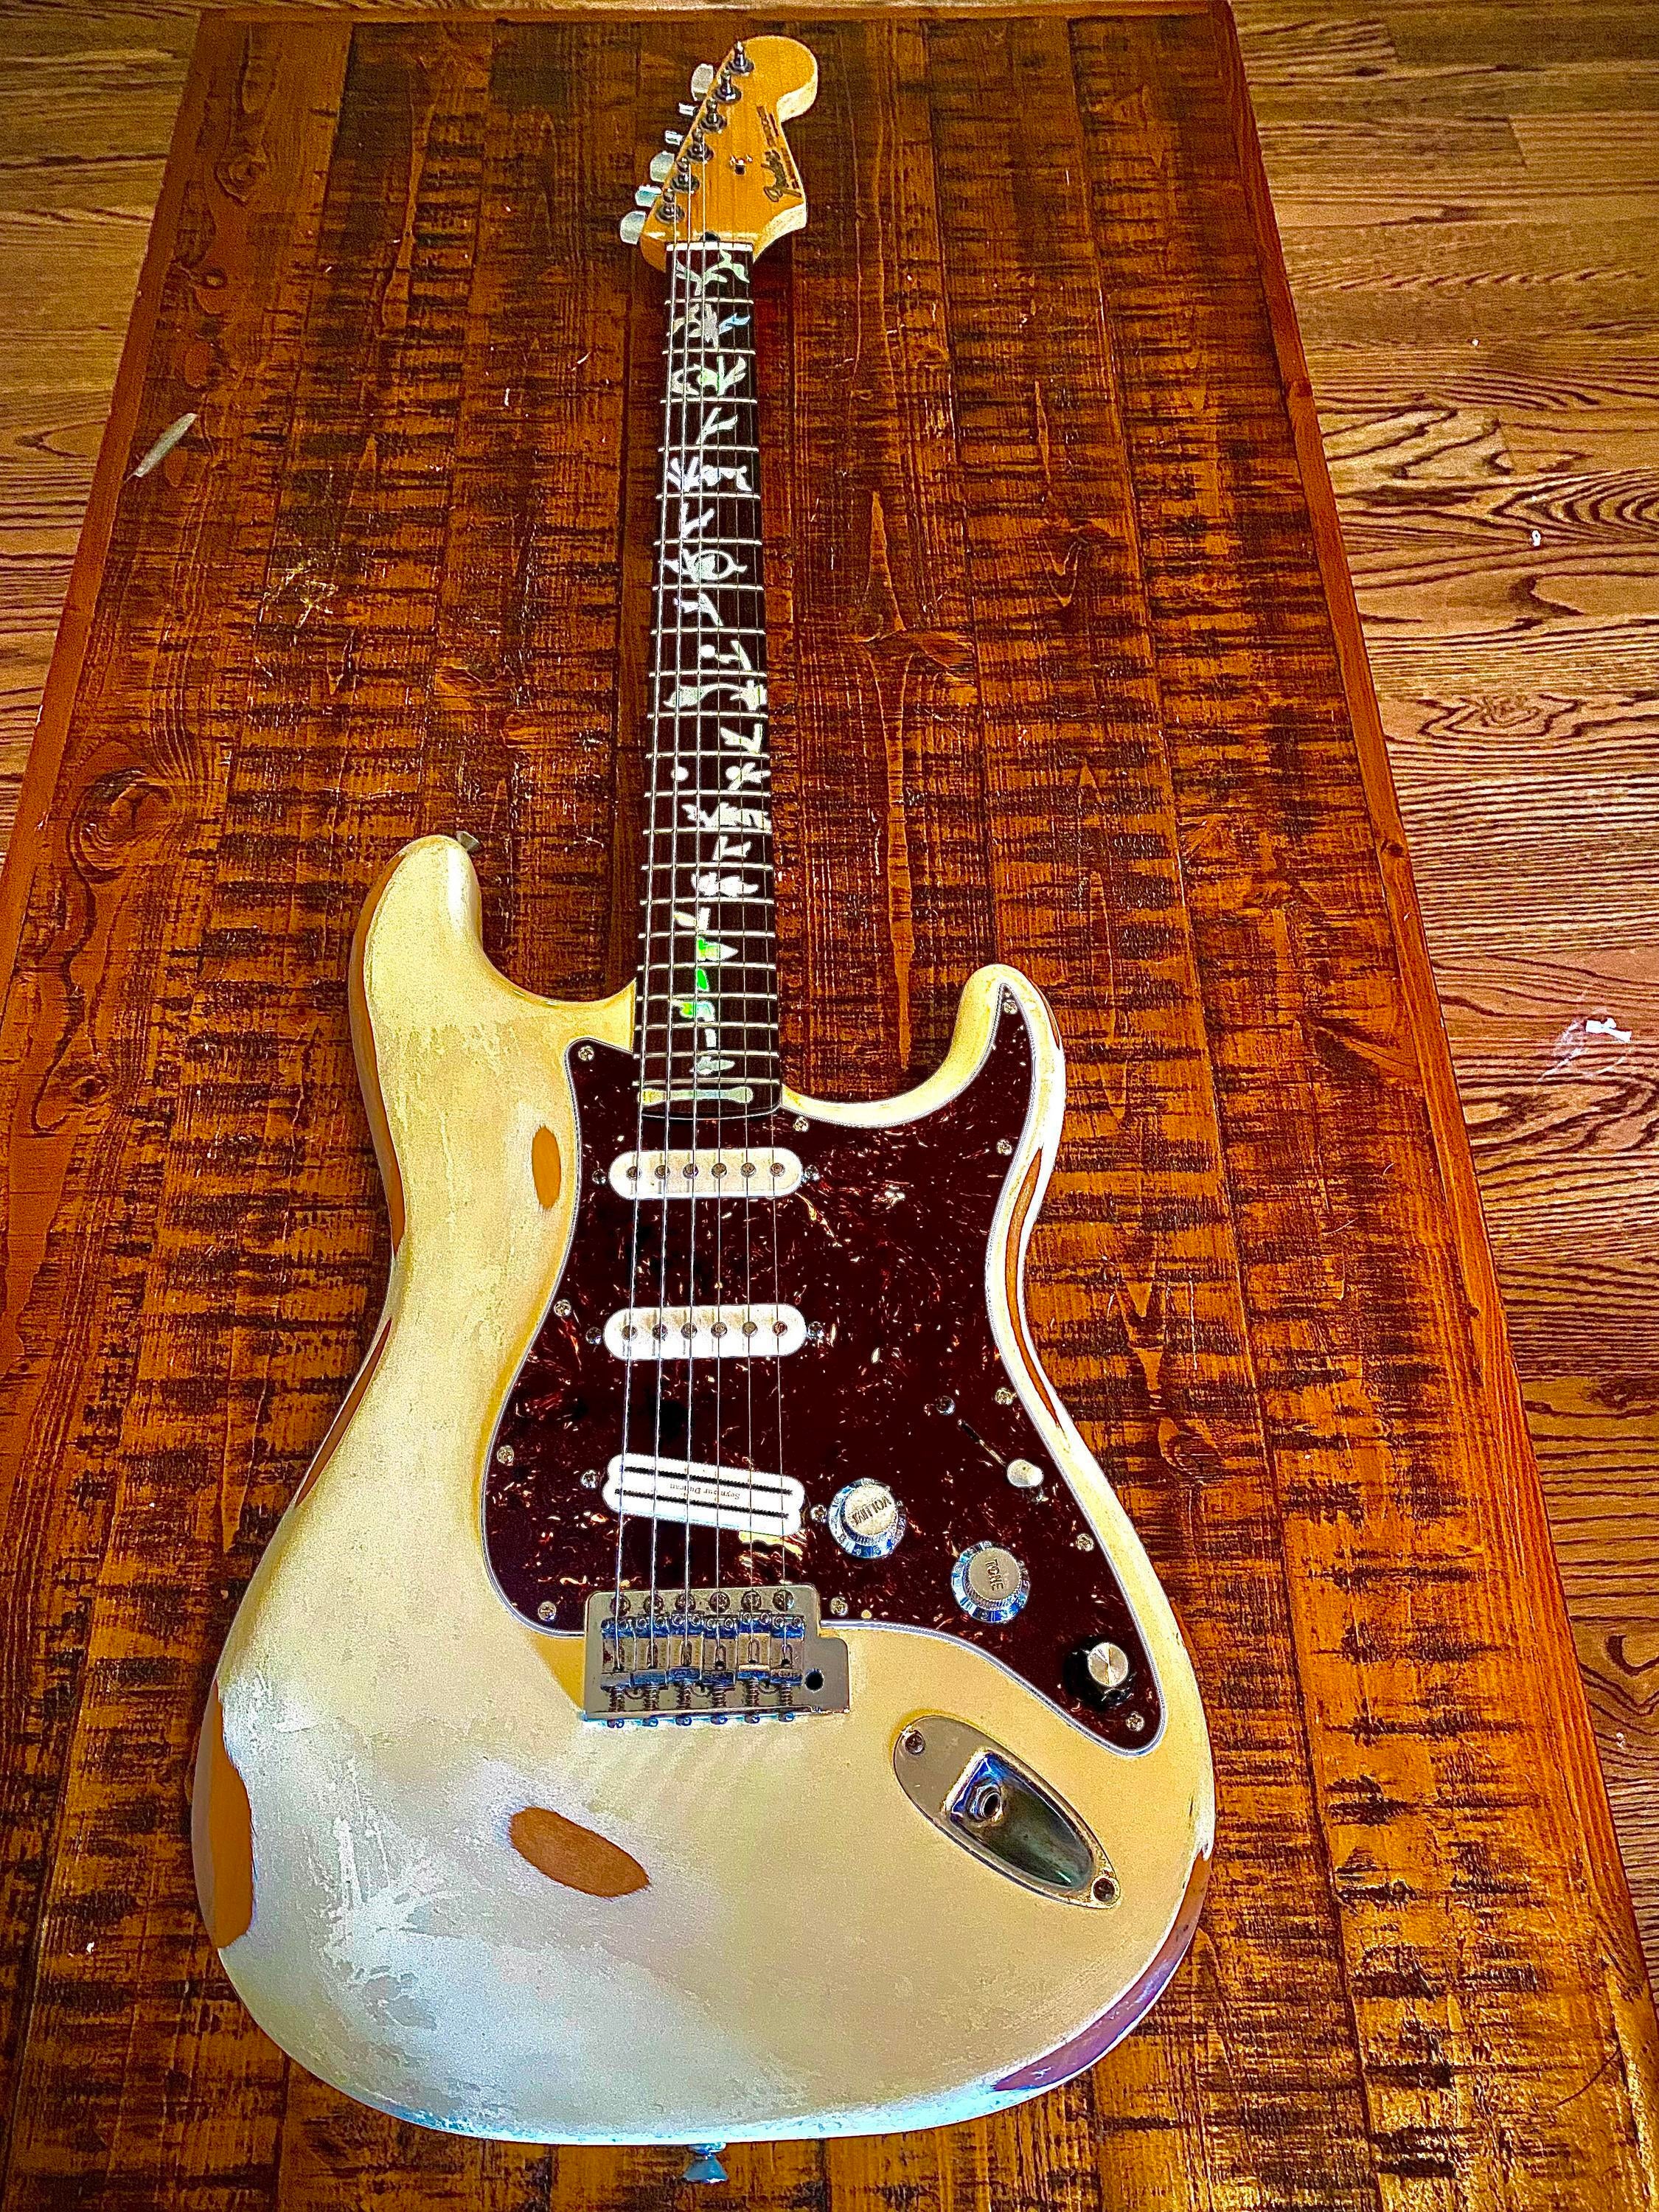 Used Fender Stratocaster Made in Mexico - Sweetwater's Gear Exchange